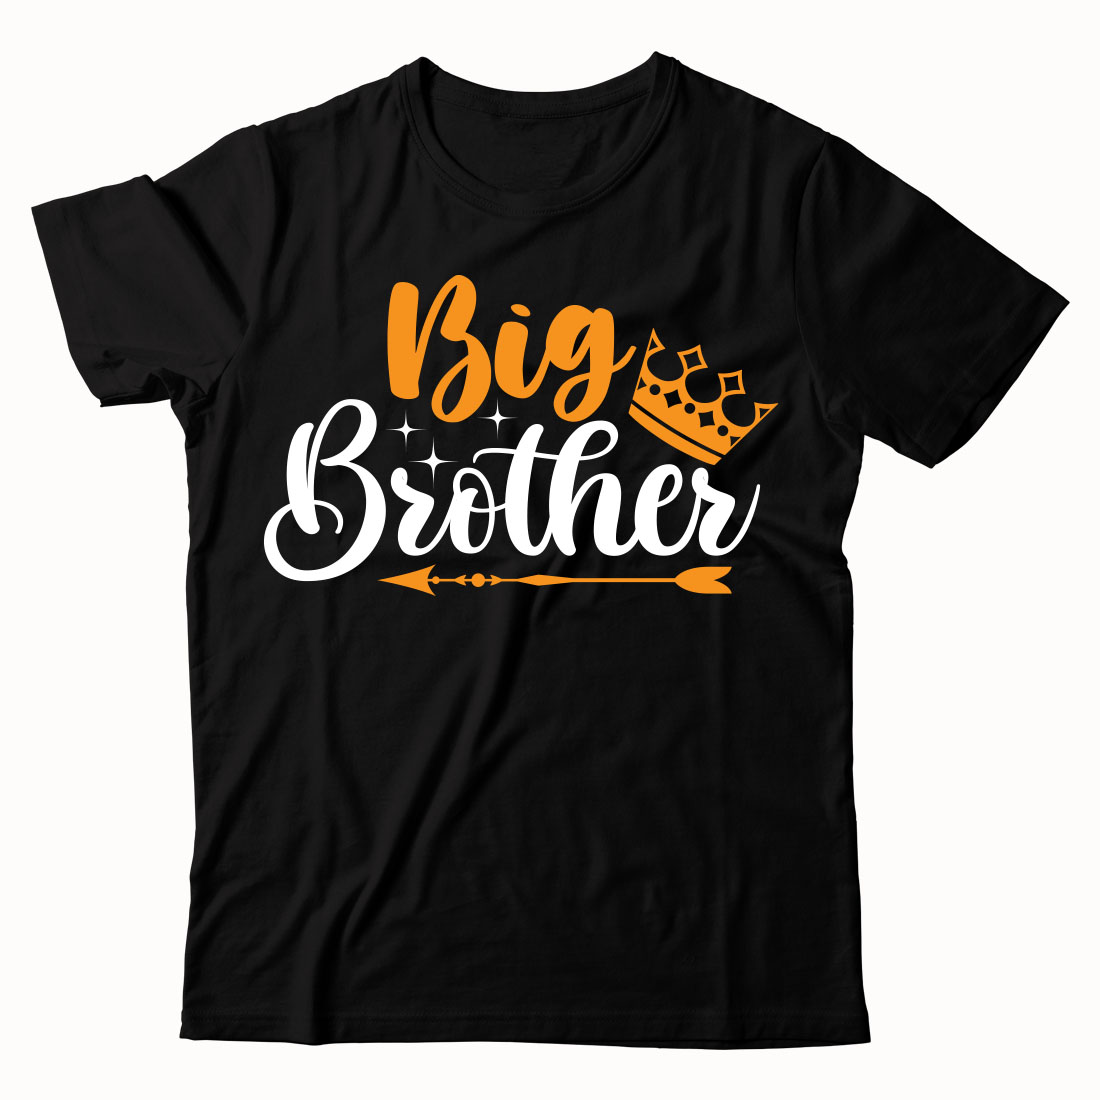 Black t - shirt that says big brother with a crown on it.